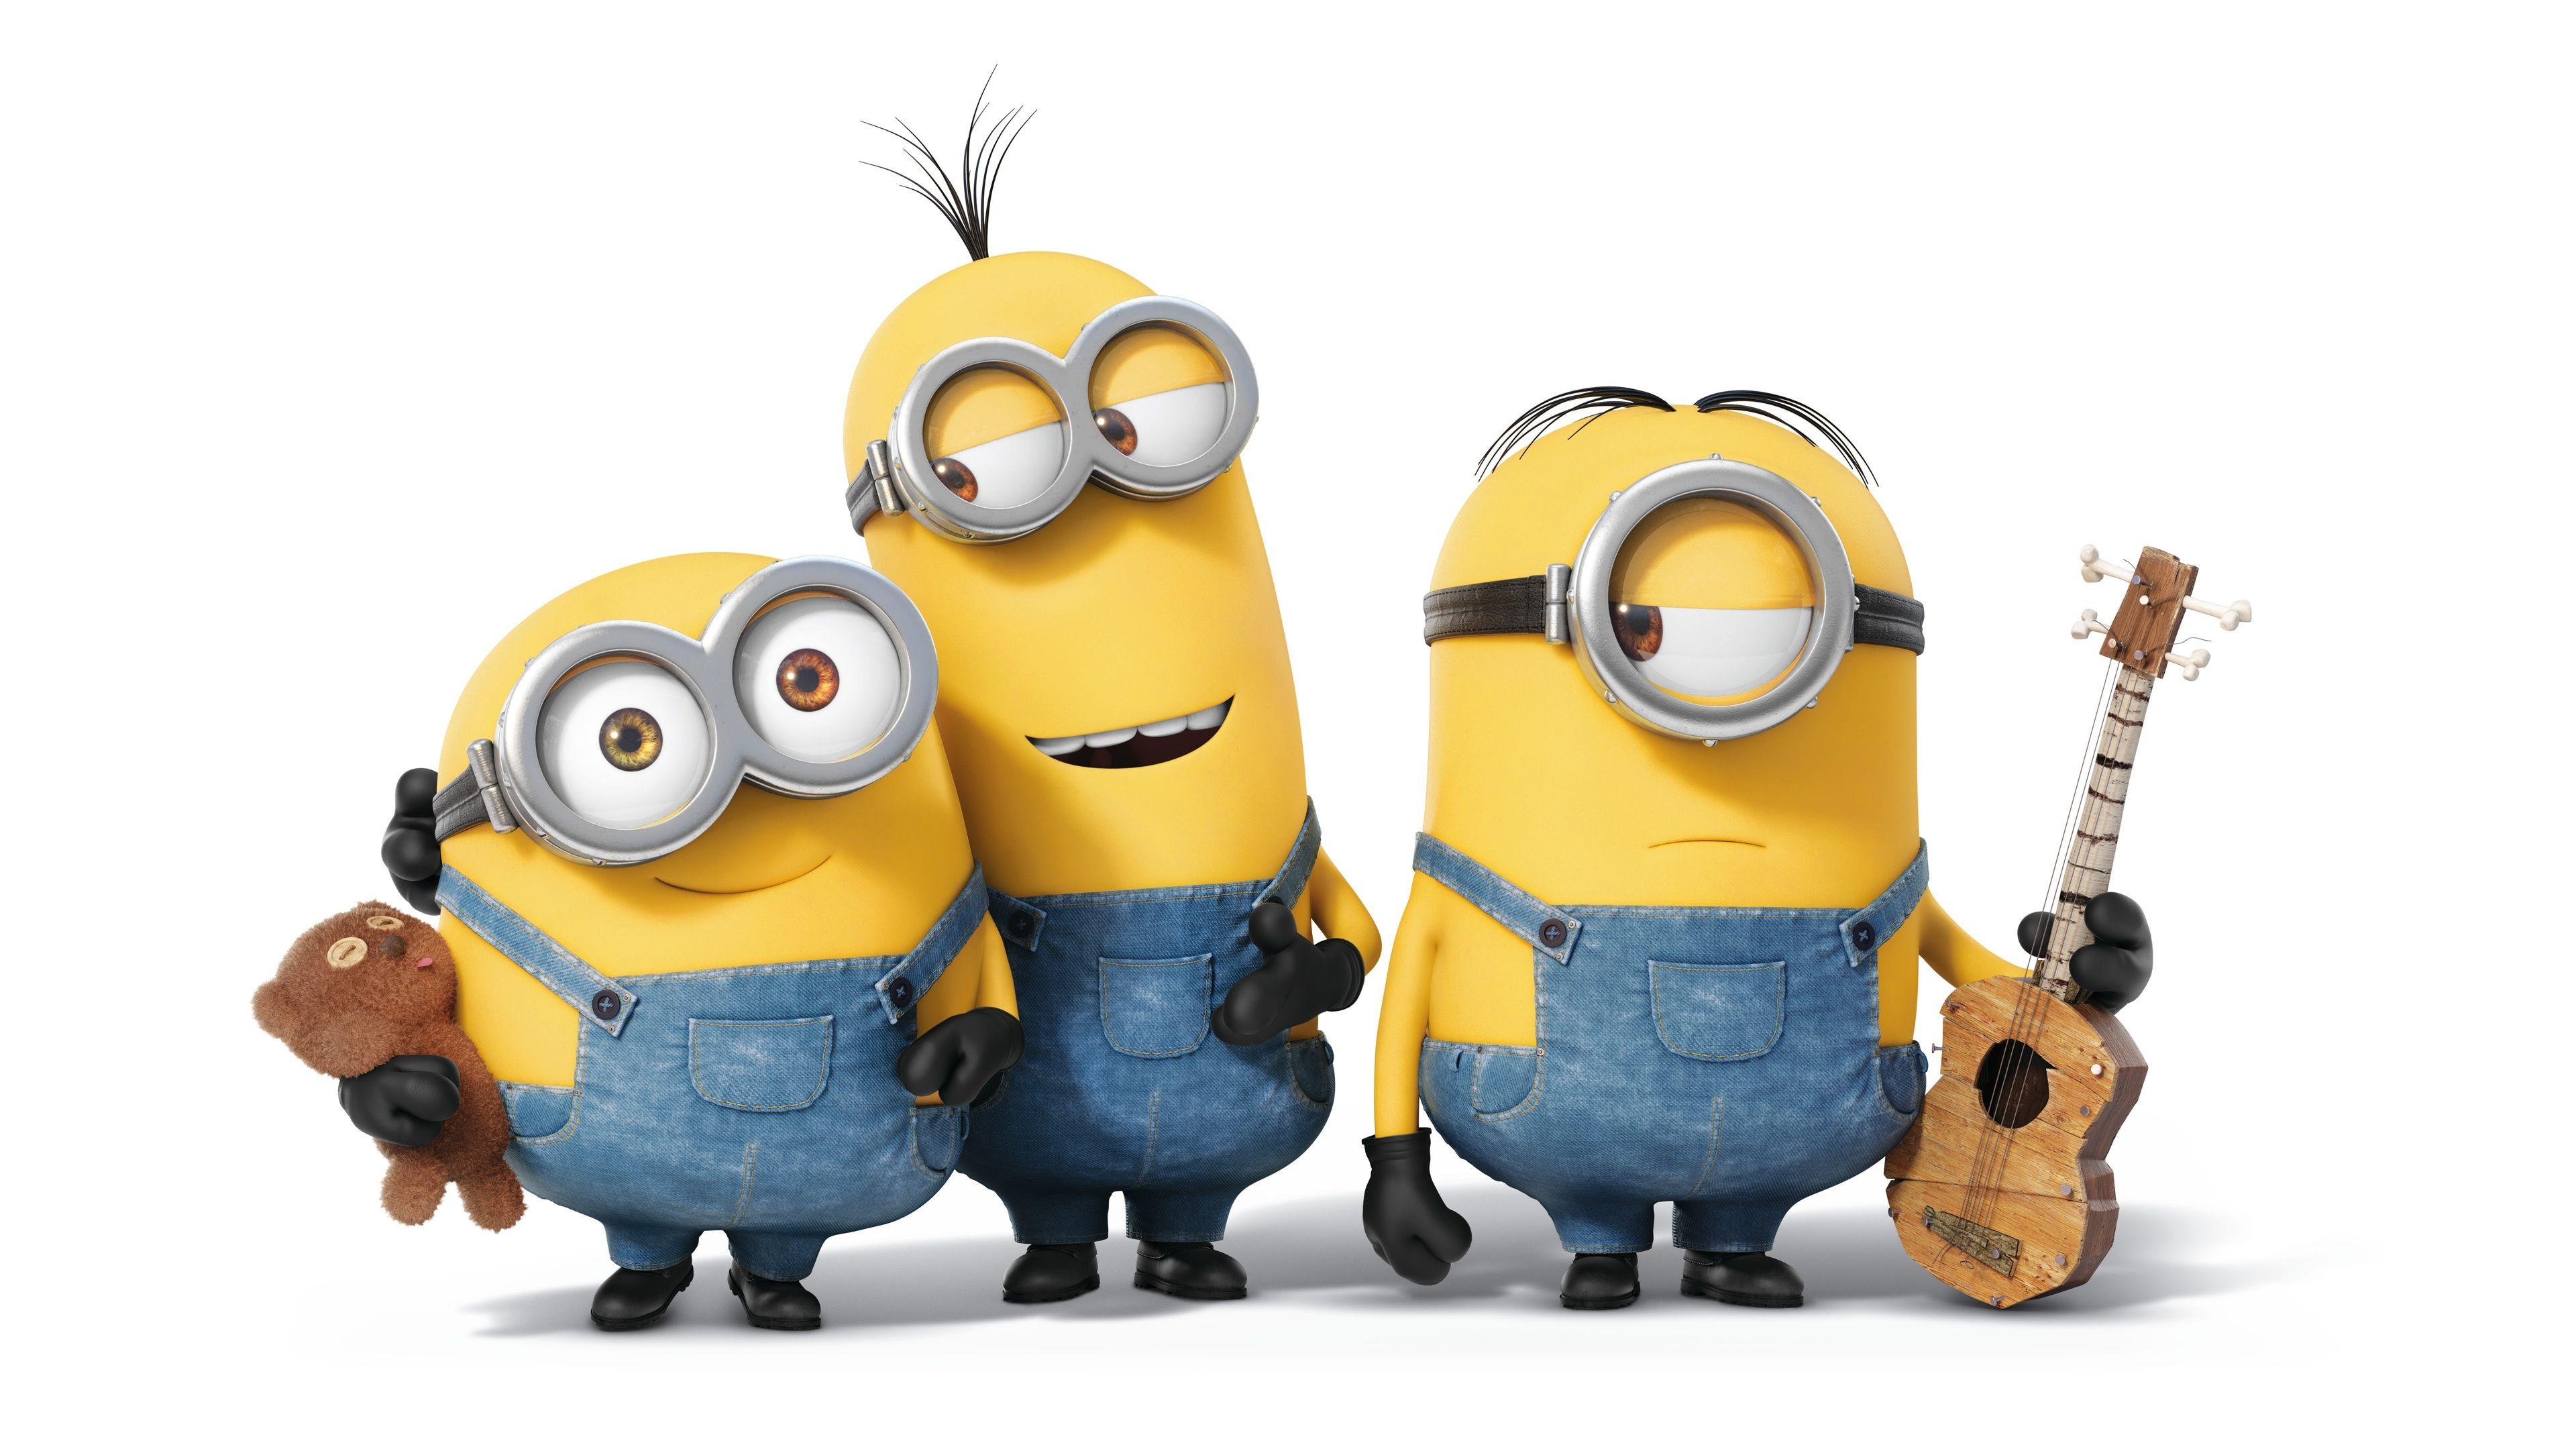 Minions Comedy Movie Wallpaper in jpg format for free download